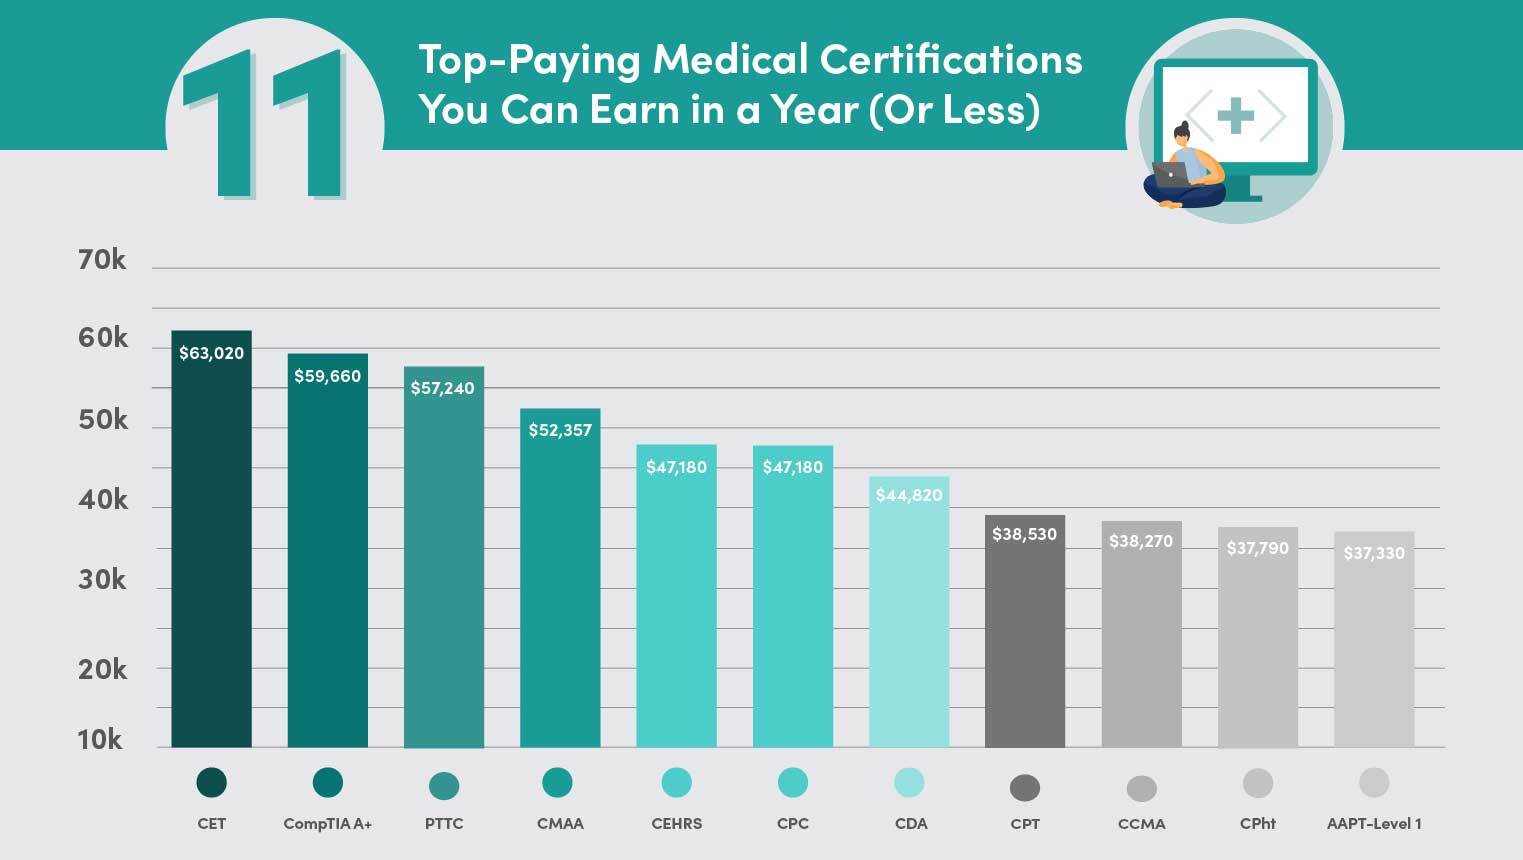 Graph displaying average salaries of all medical certifications listed below, descending order from highest salary to lowest. Text says Top-Paying Medical Certification You Can Earn in a Year or Less.